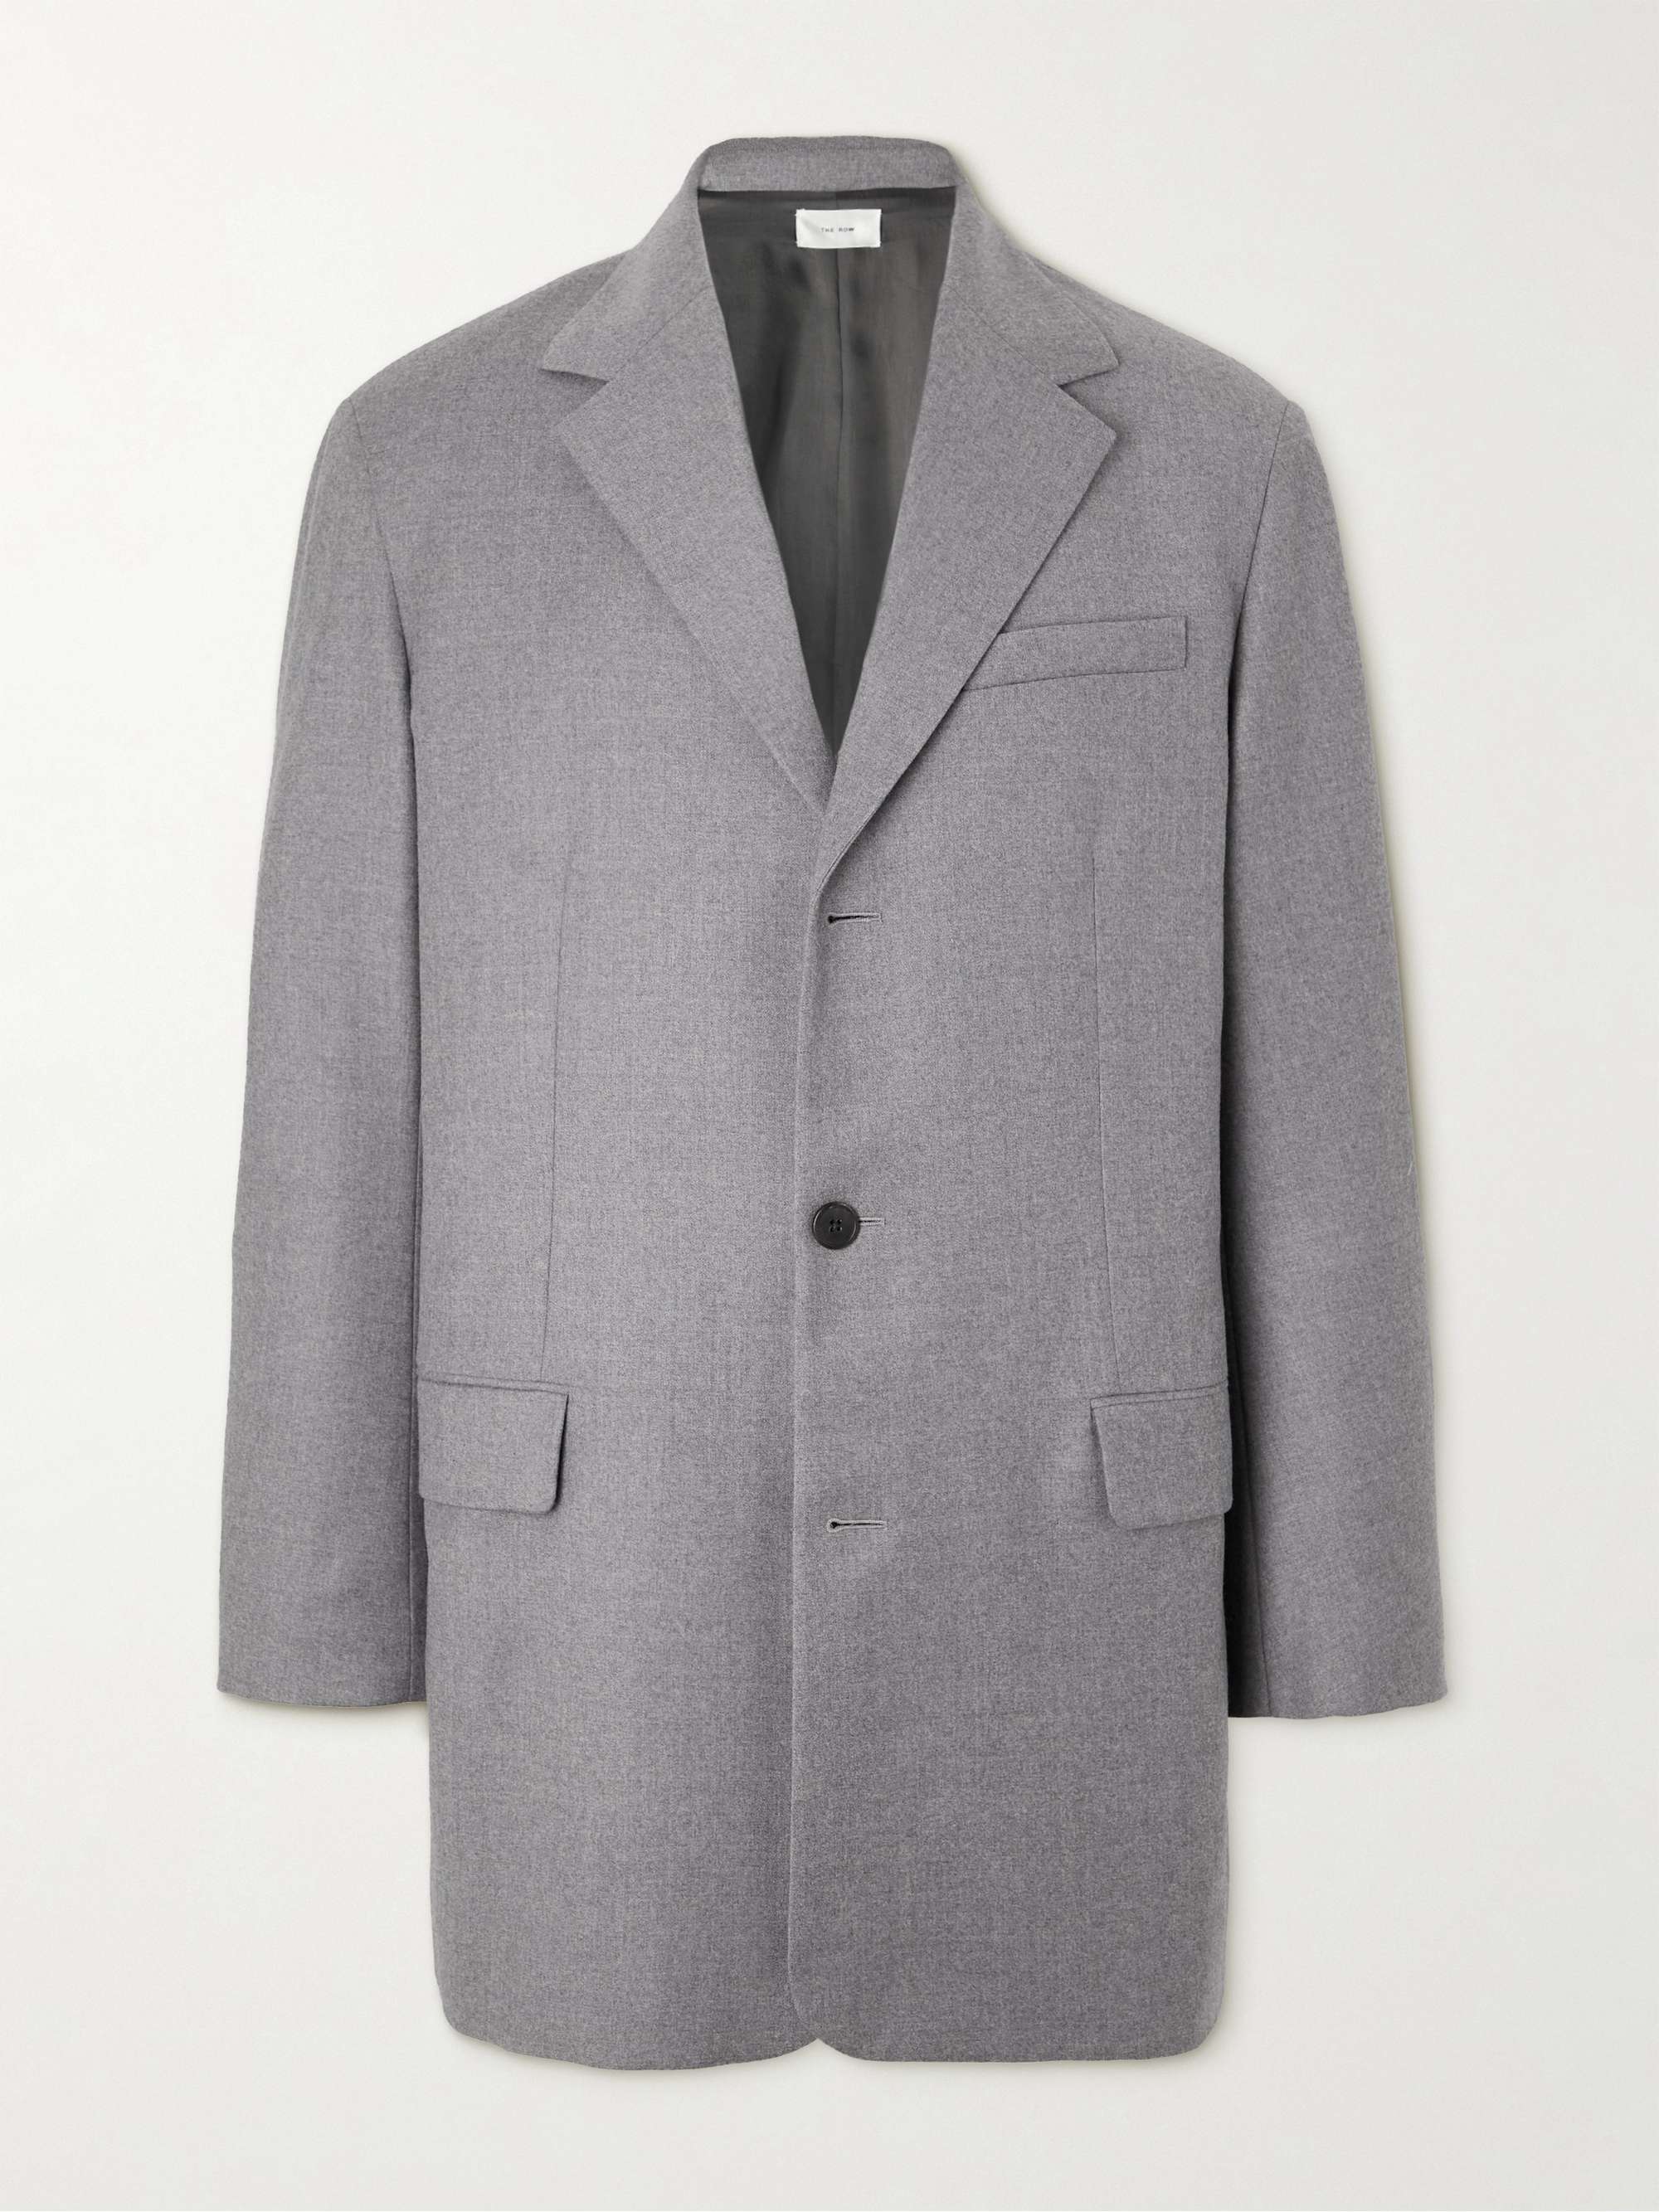 THE ROW Winslow Oversized Unstructured Virgin Wool Suit Jacket